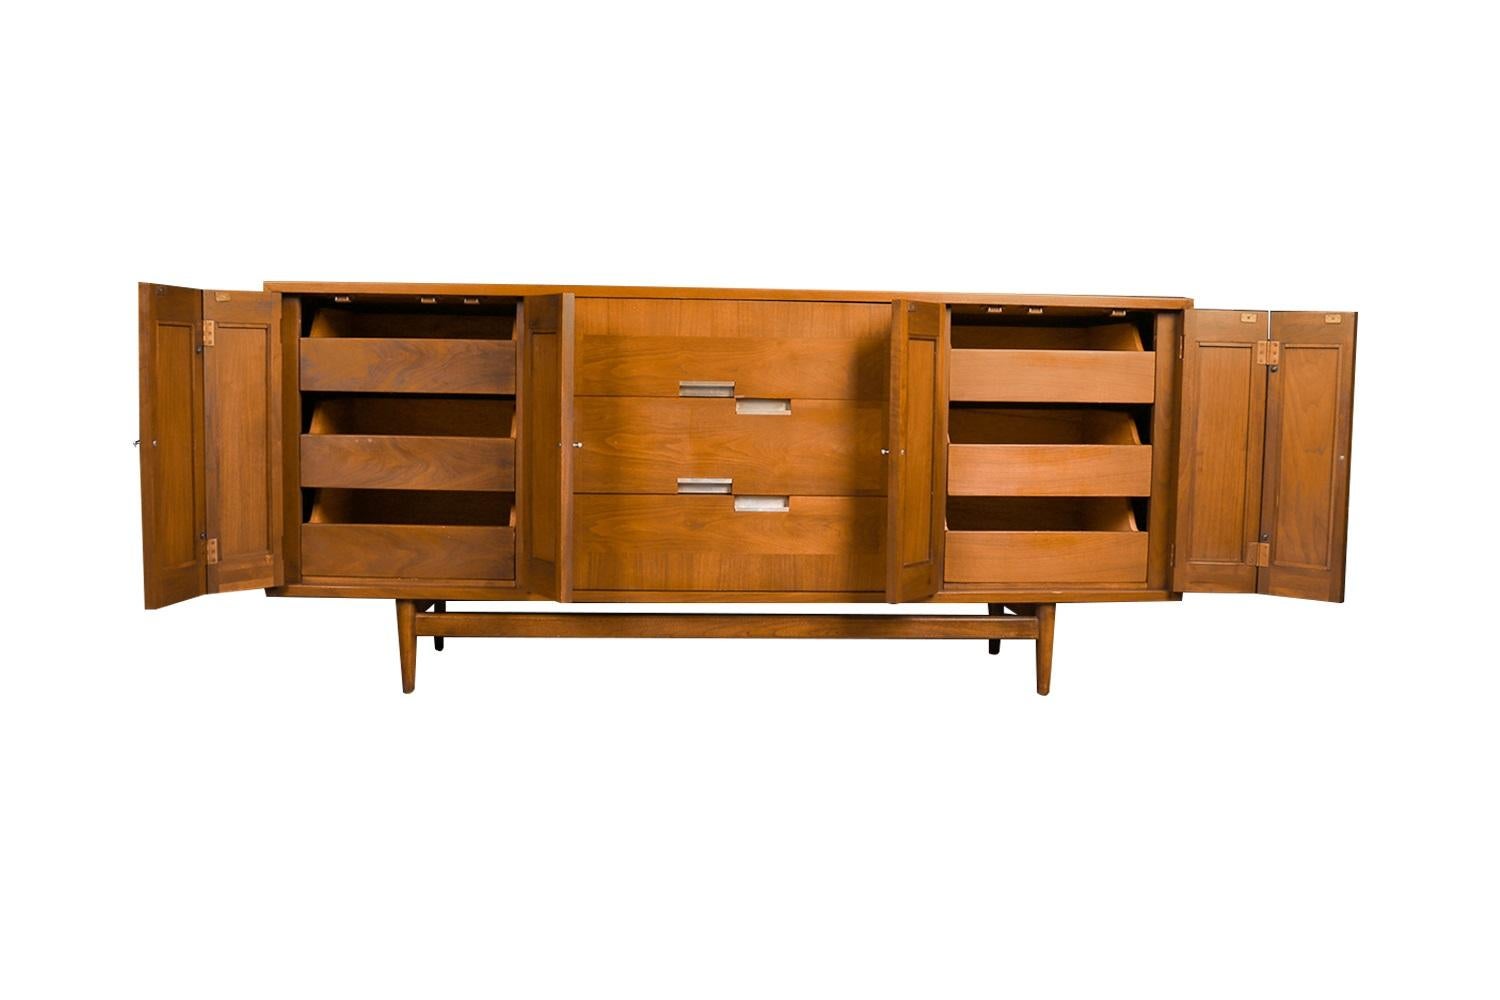 This exceedingly well-crafted American of Martinsville dresser was designed by Merton Gershun for American of Martinsville, features the mid-century style and construction quality that keep these pieces in such high demand today. Beautiful all